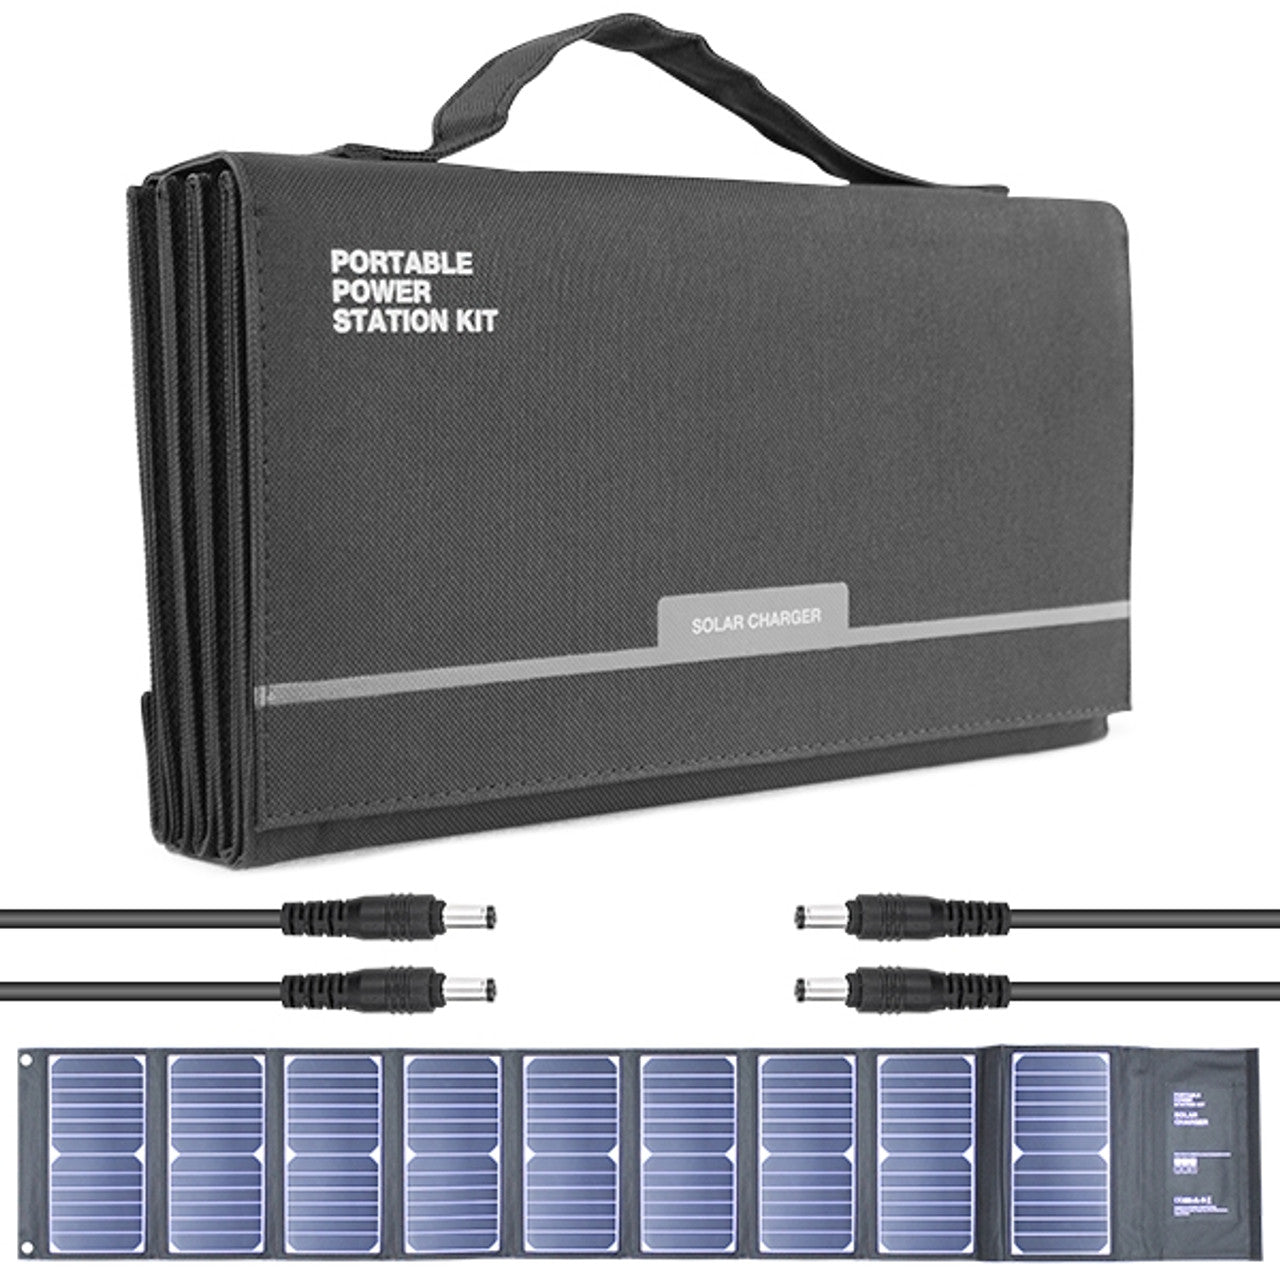 Hyundai H60 Portable & Foldable Solar Charger With USB and DC Connectivity 60W